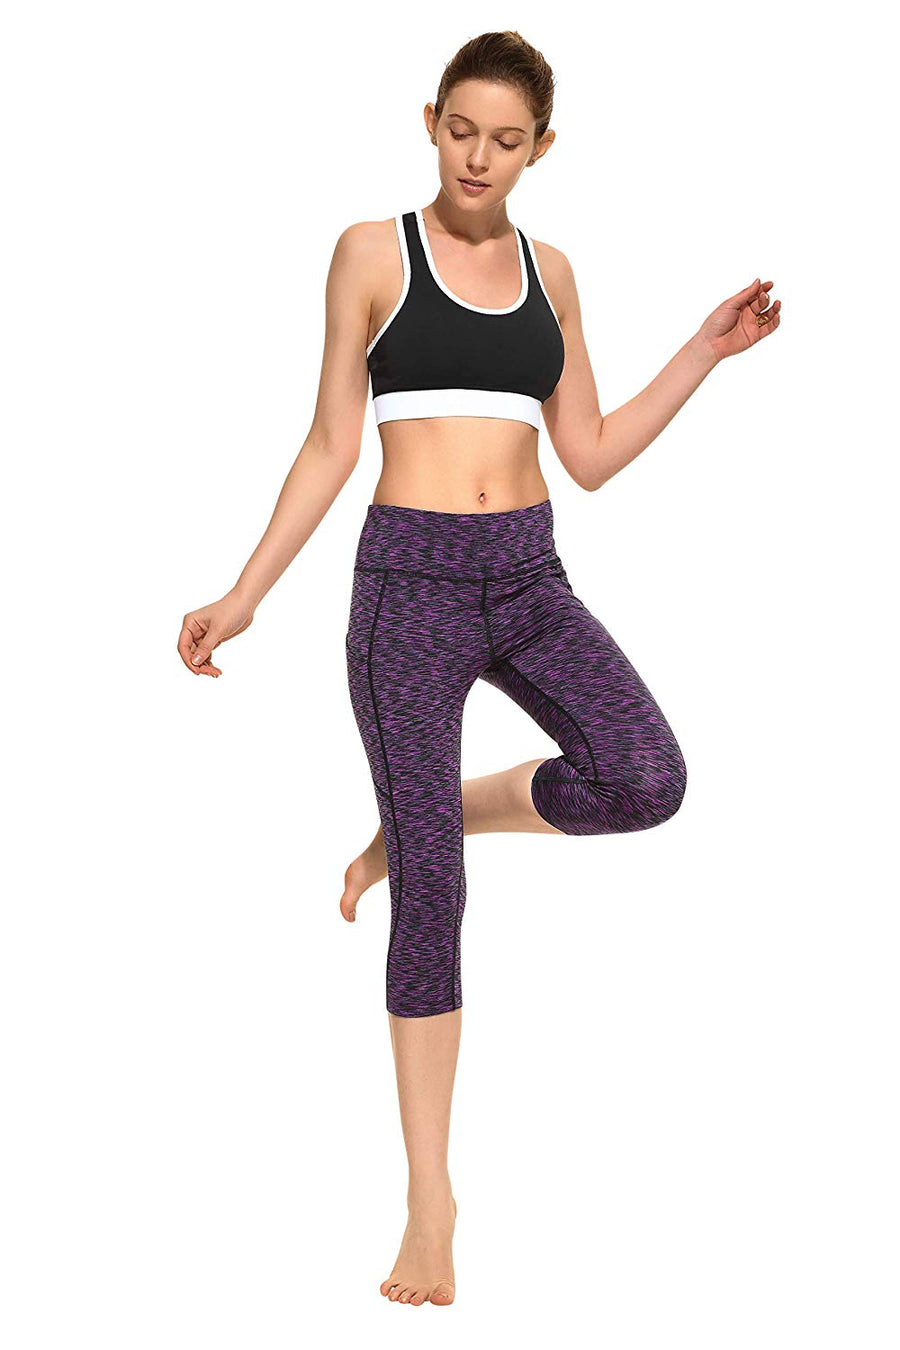 CYZ Women's Space-Dyed Tummy Control Yoga Workout Leggings with